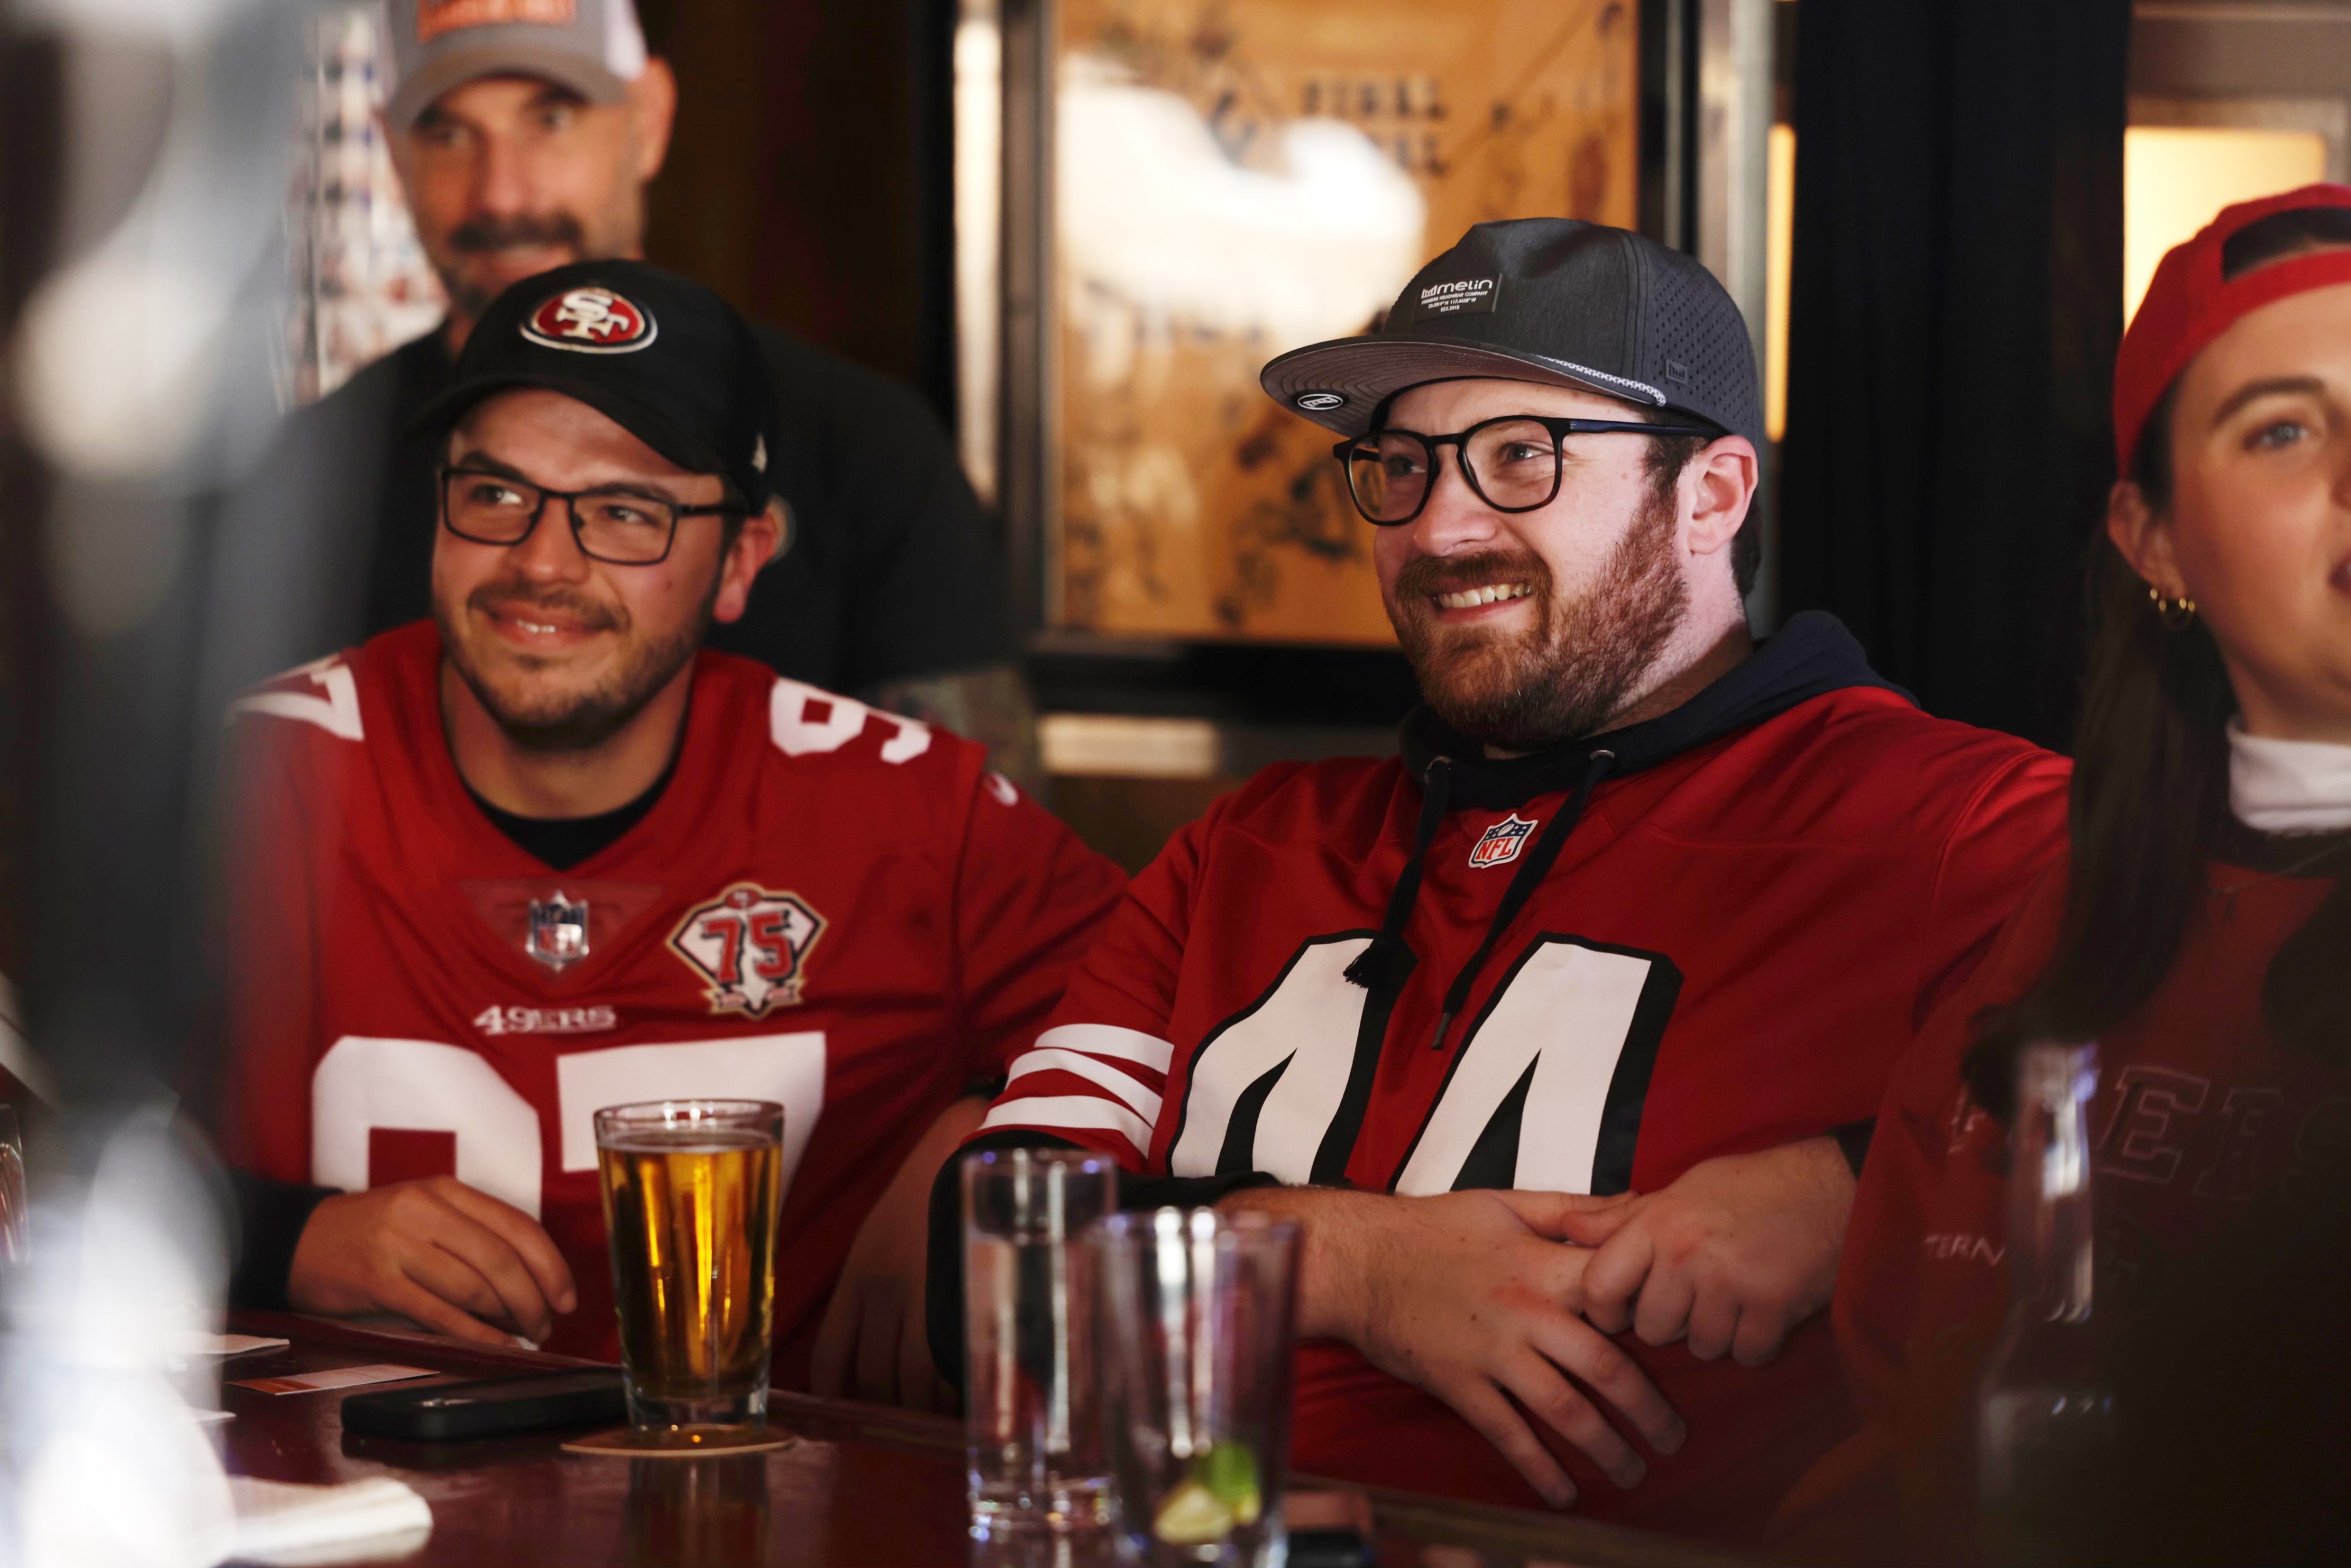 Fans in a bar wear 49ers jerseys and caps, smiling, with drinks on the table.